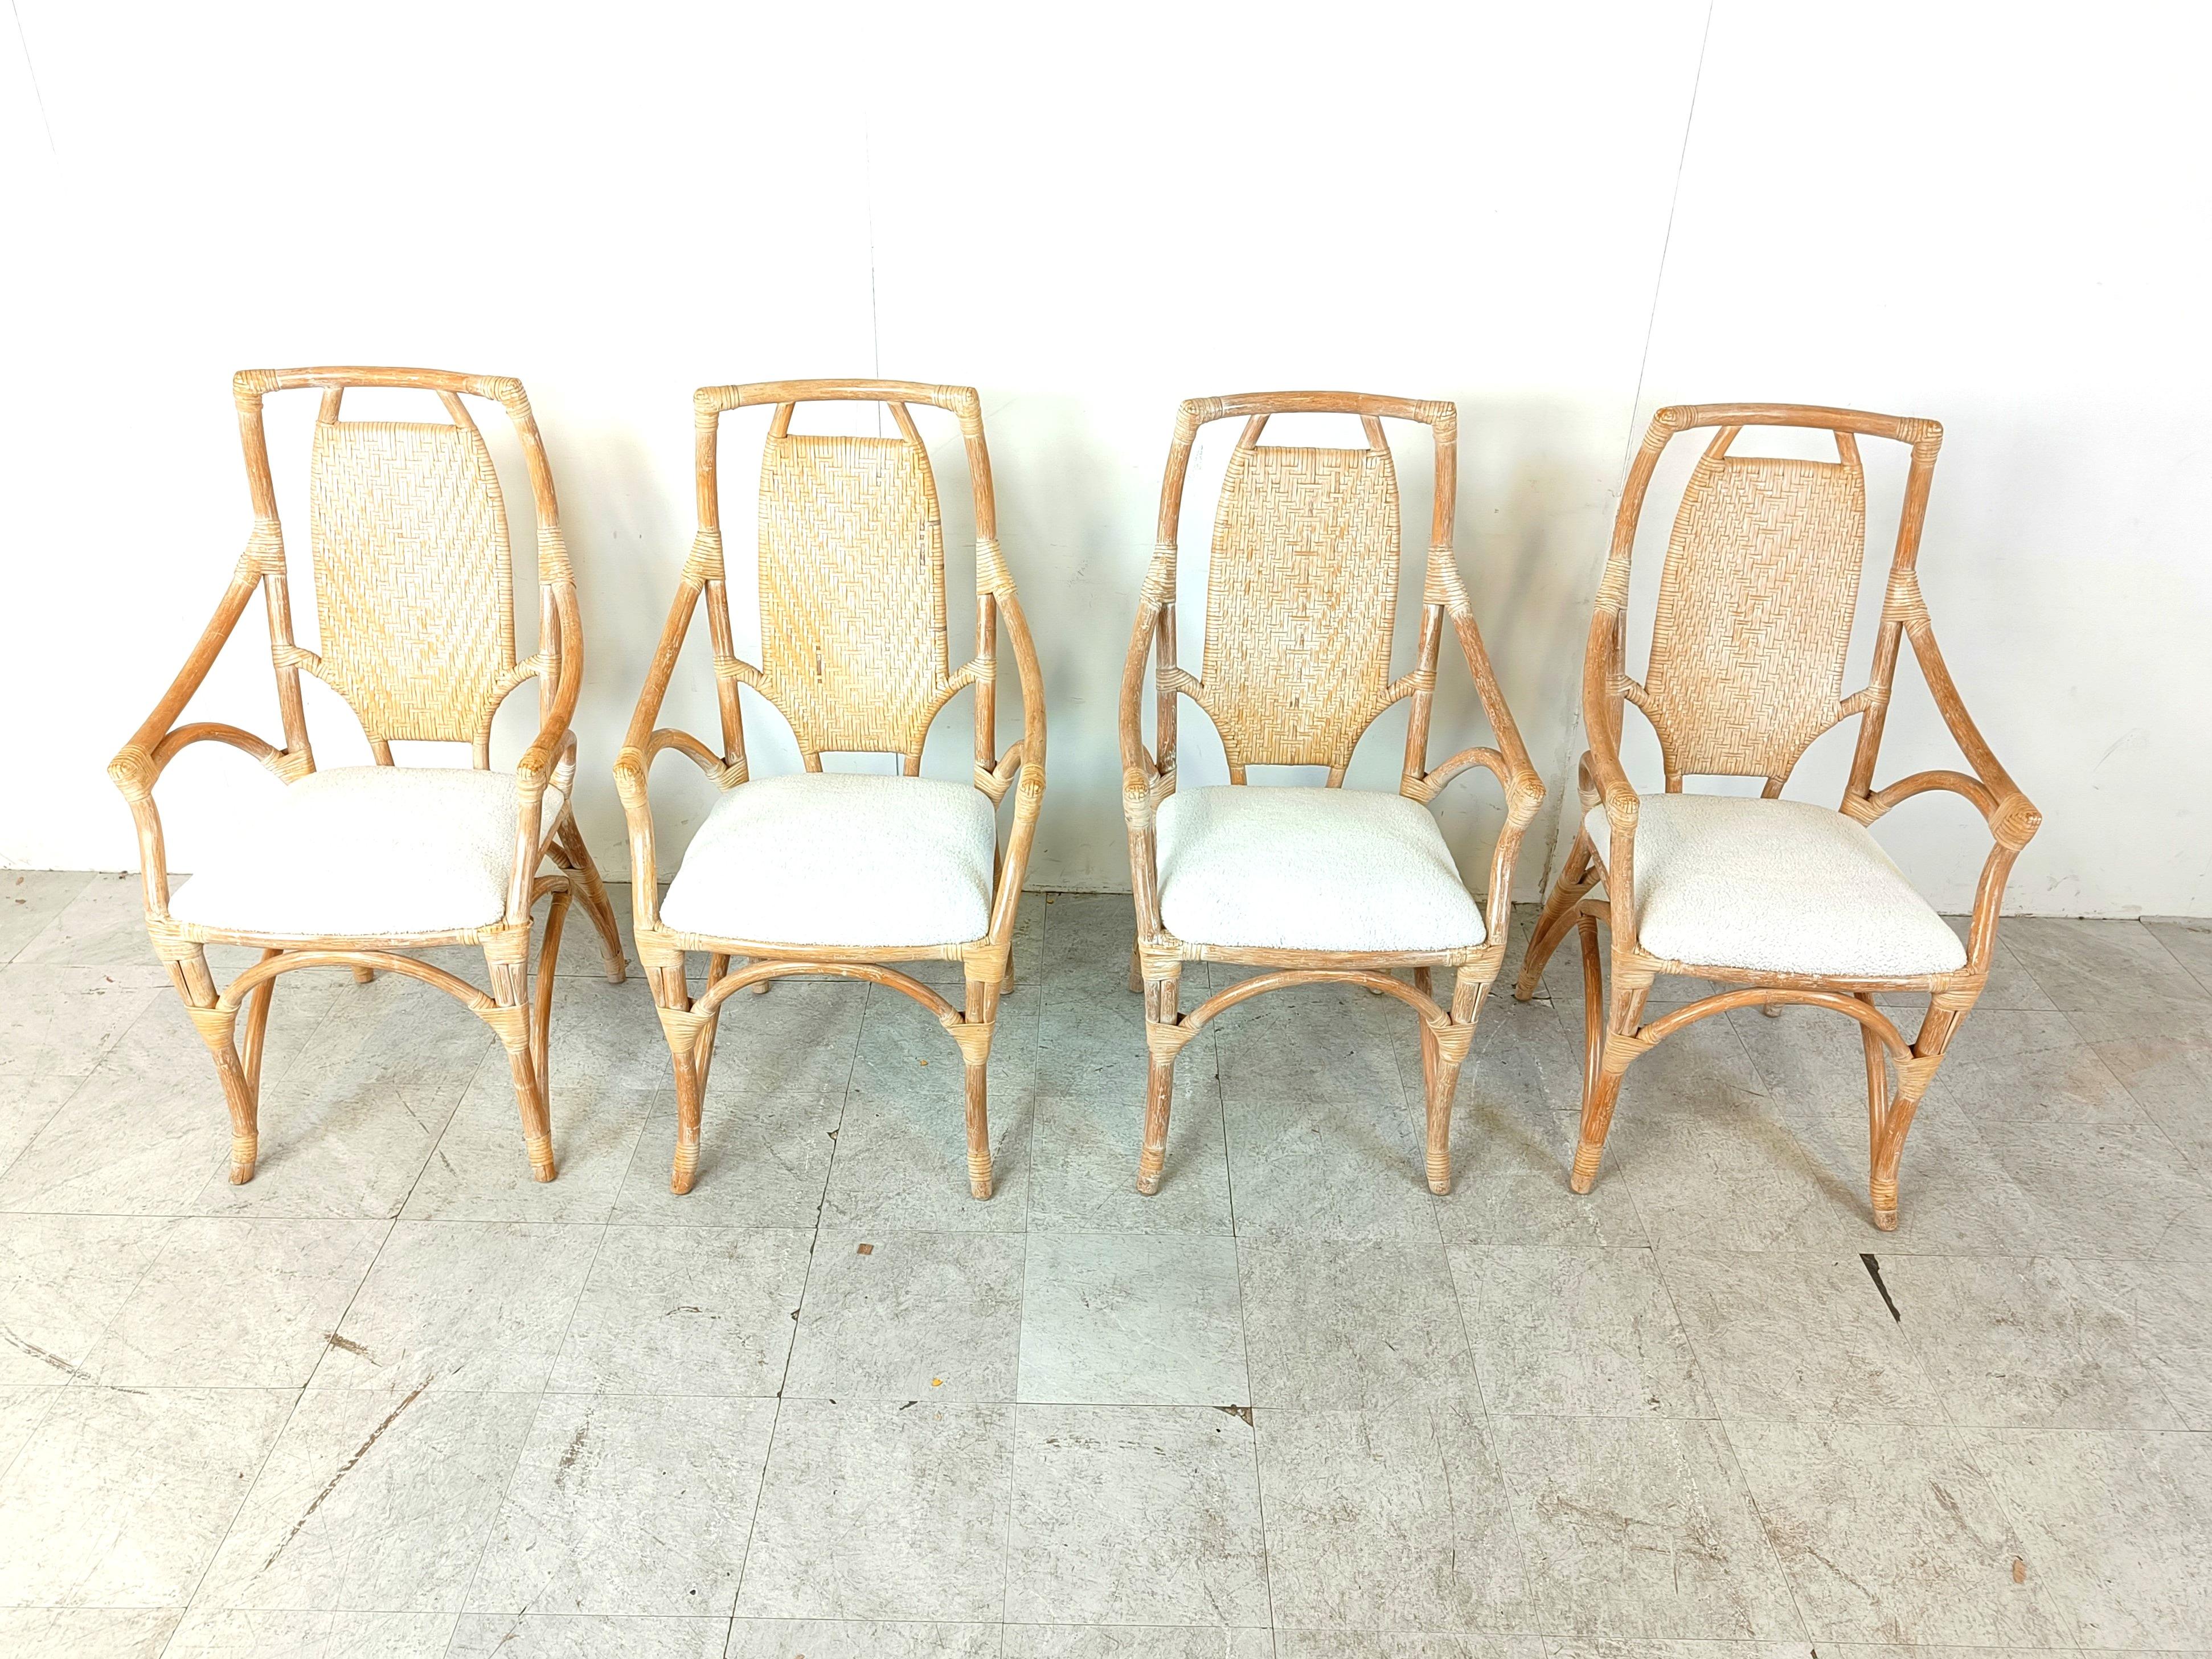 Elegant vintage bamboo dining chairs newly upholstered with white bouclé fabric with a webbing backrest.

Timeless and decorative pieces.

Good condition.

1960s - France

Height: 107cm
Width: 60cm
Depth: 50cm
Seat Height: 50cm

Ref.: 305022